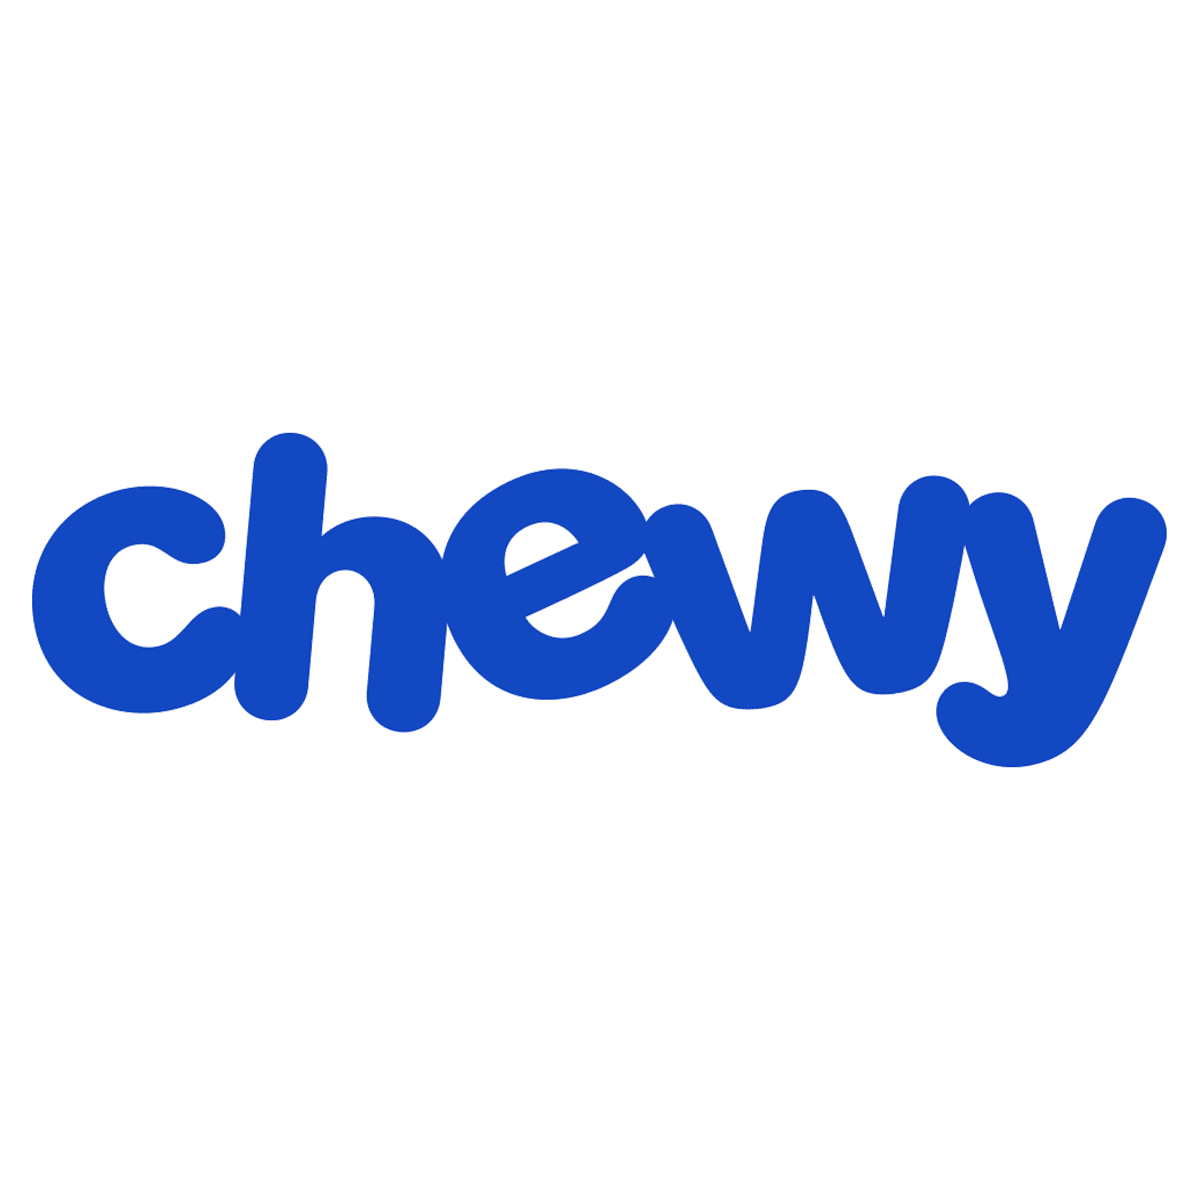 A blue chewy logo on a green background.